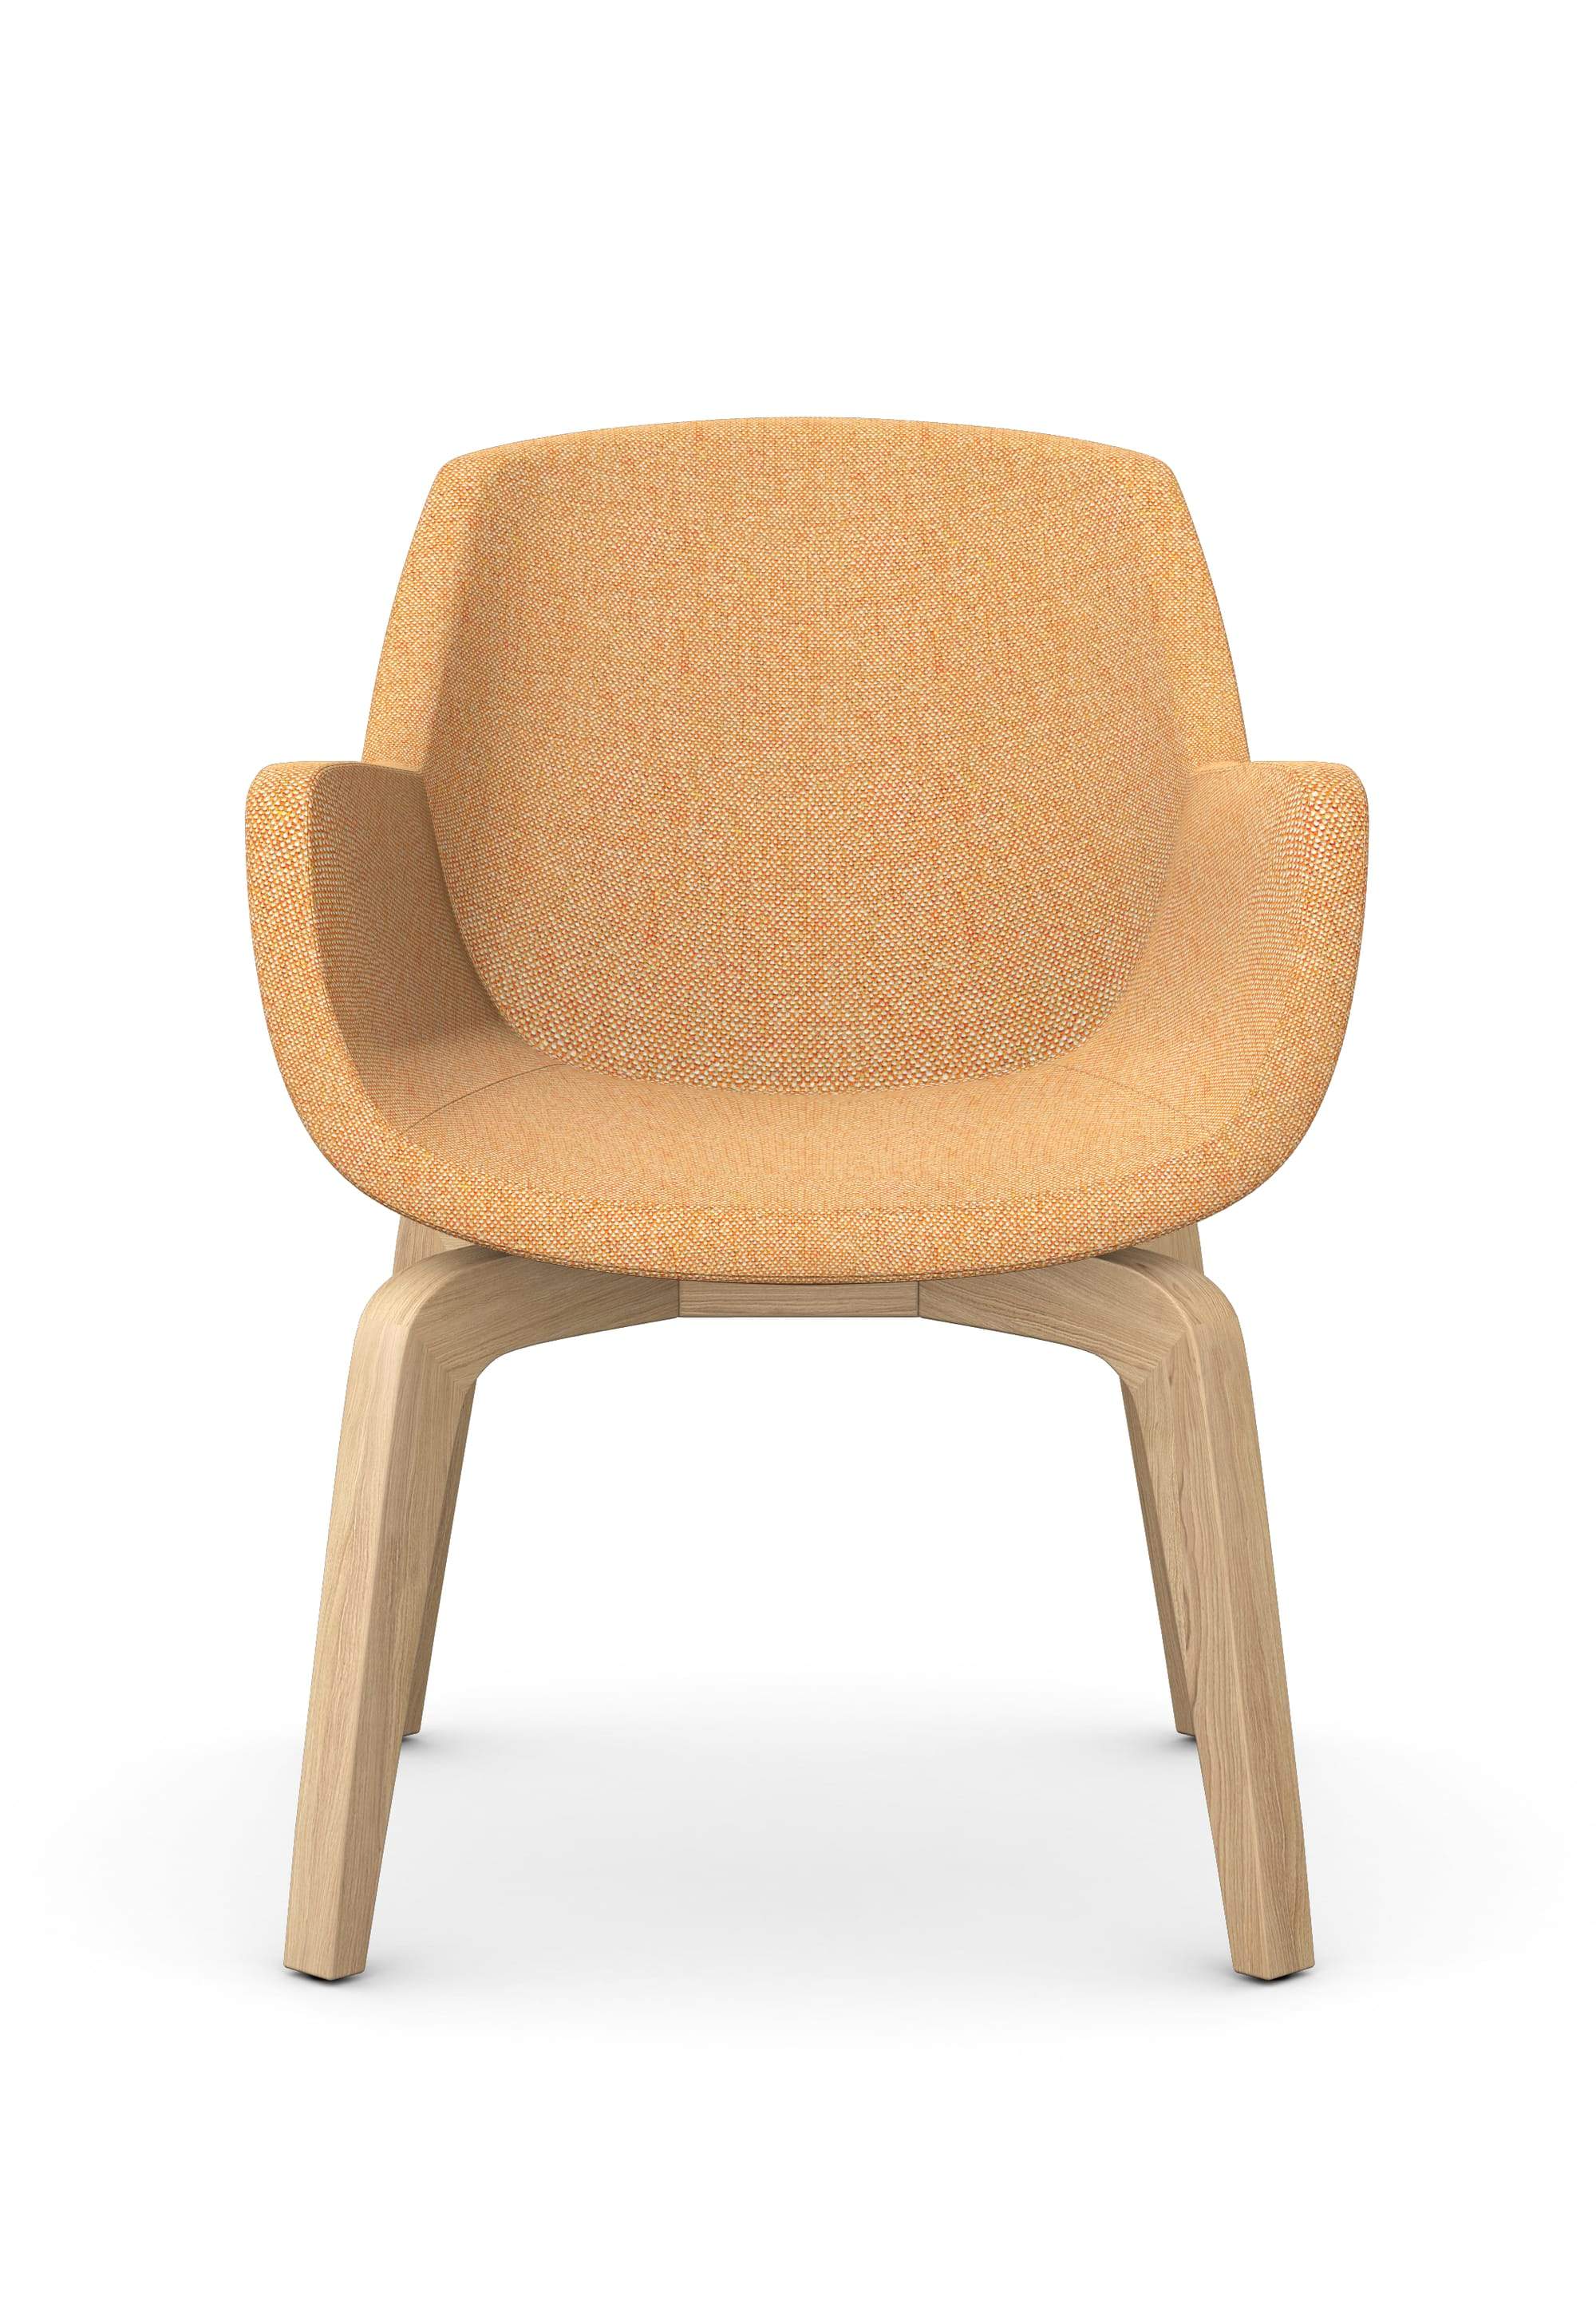 TIANA - Chair, 4 Curved Wooden Legs